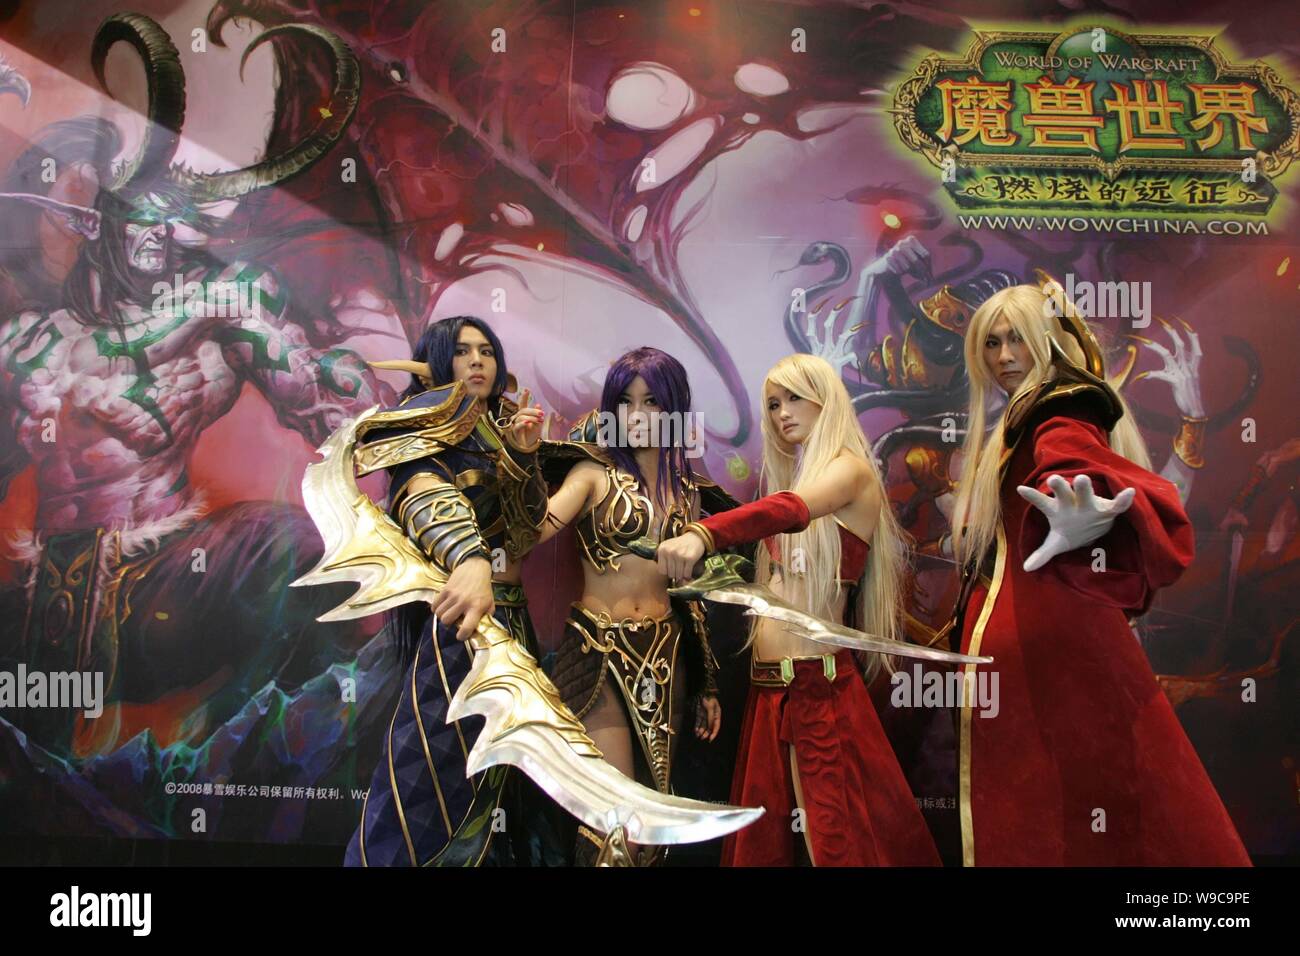 --FILE-- Chinese COSPLAY performers pose at the stand of the online game, World of Warcraft, during an exhibition in Beijing, China, July 25, 2009. Stock Photo